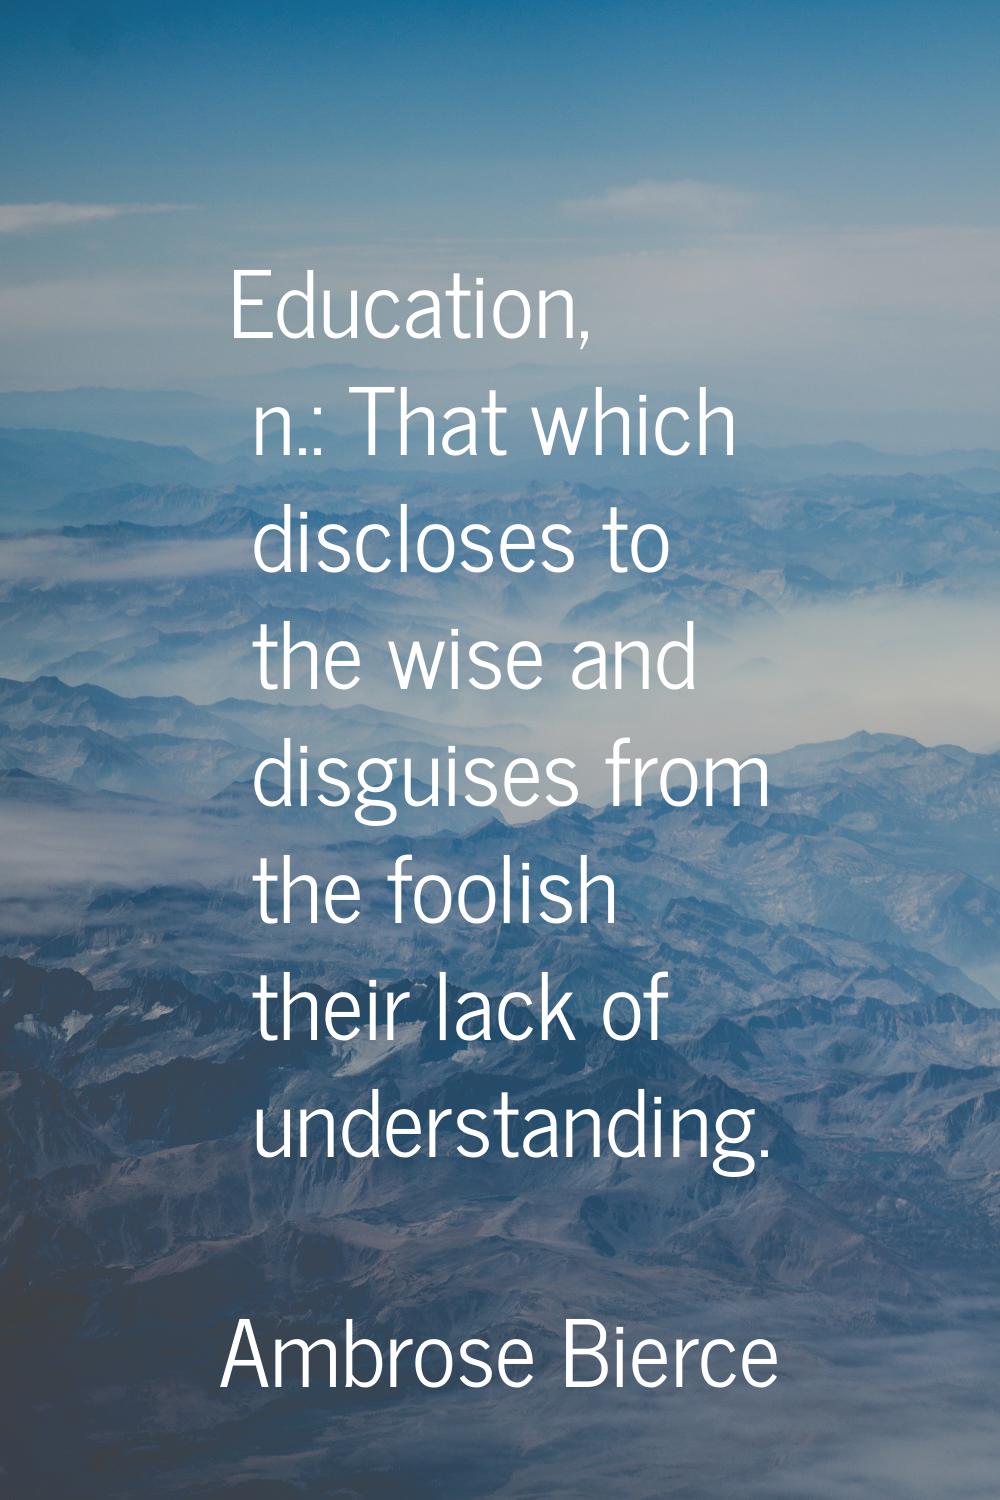 Education, n.: That which discloses to the wise and disguises from the foolish their lack of unders